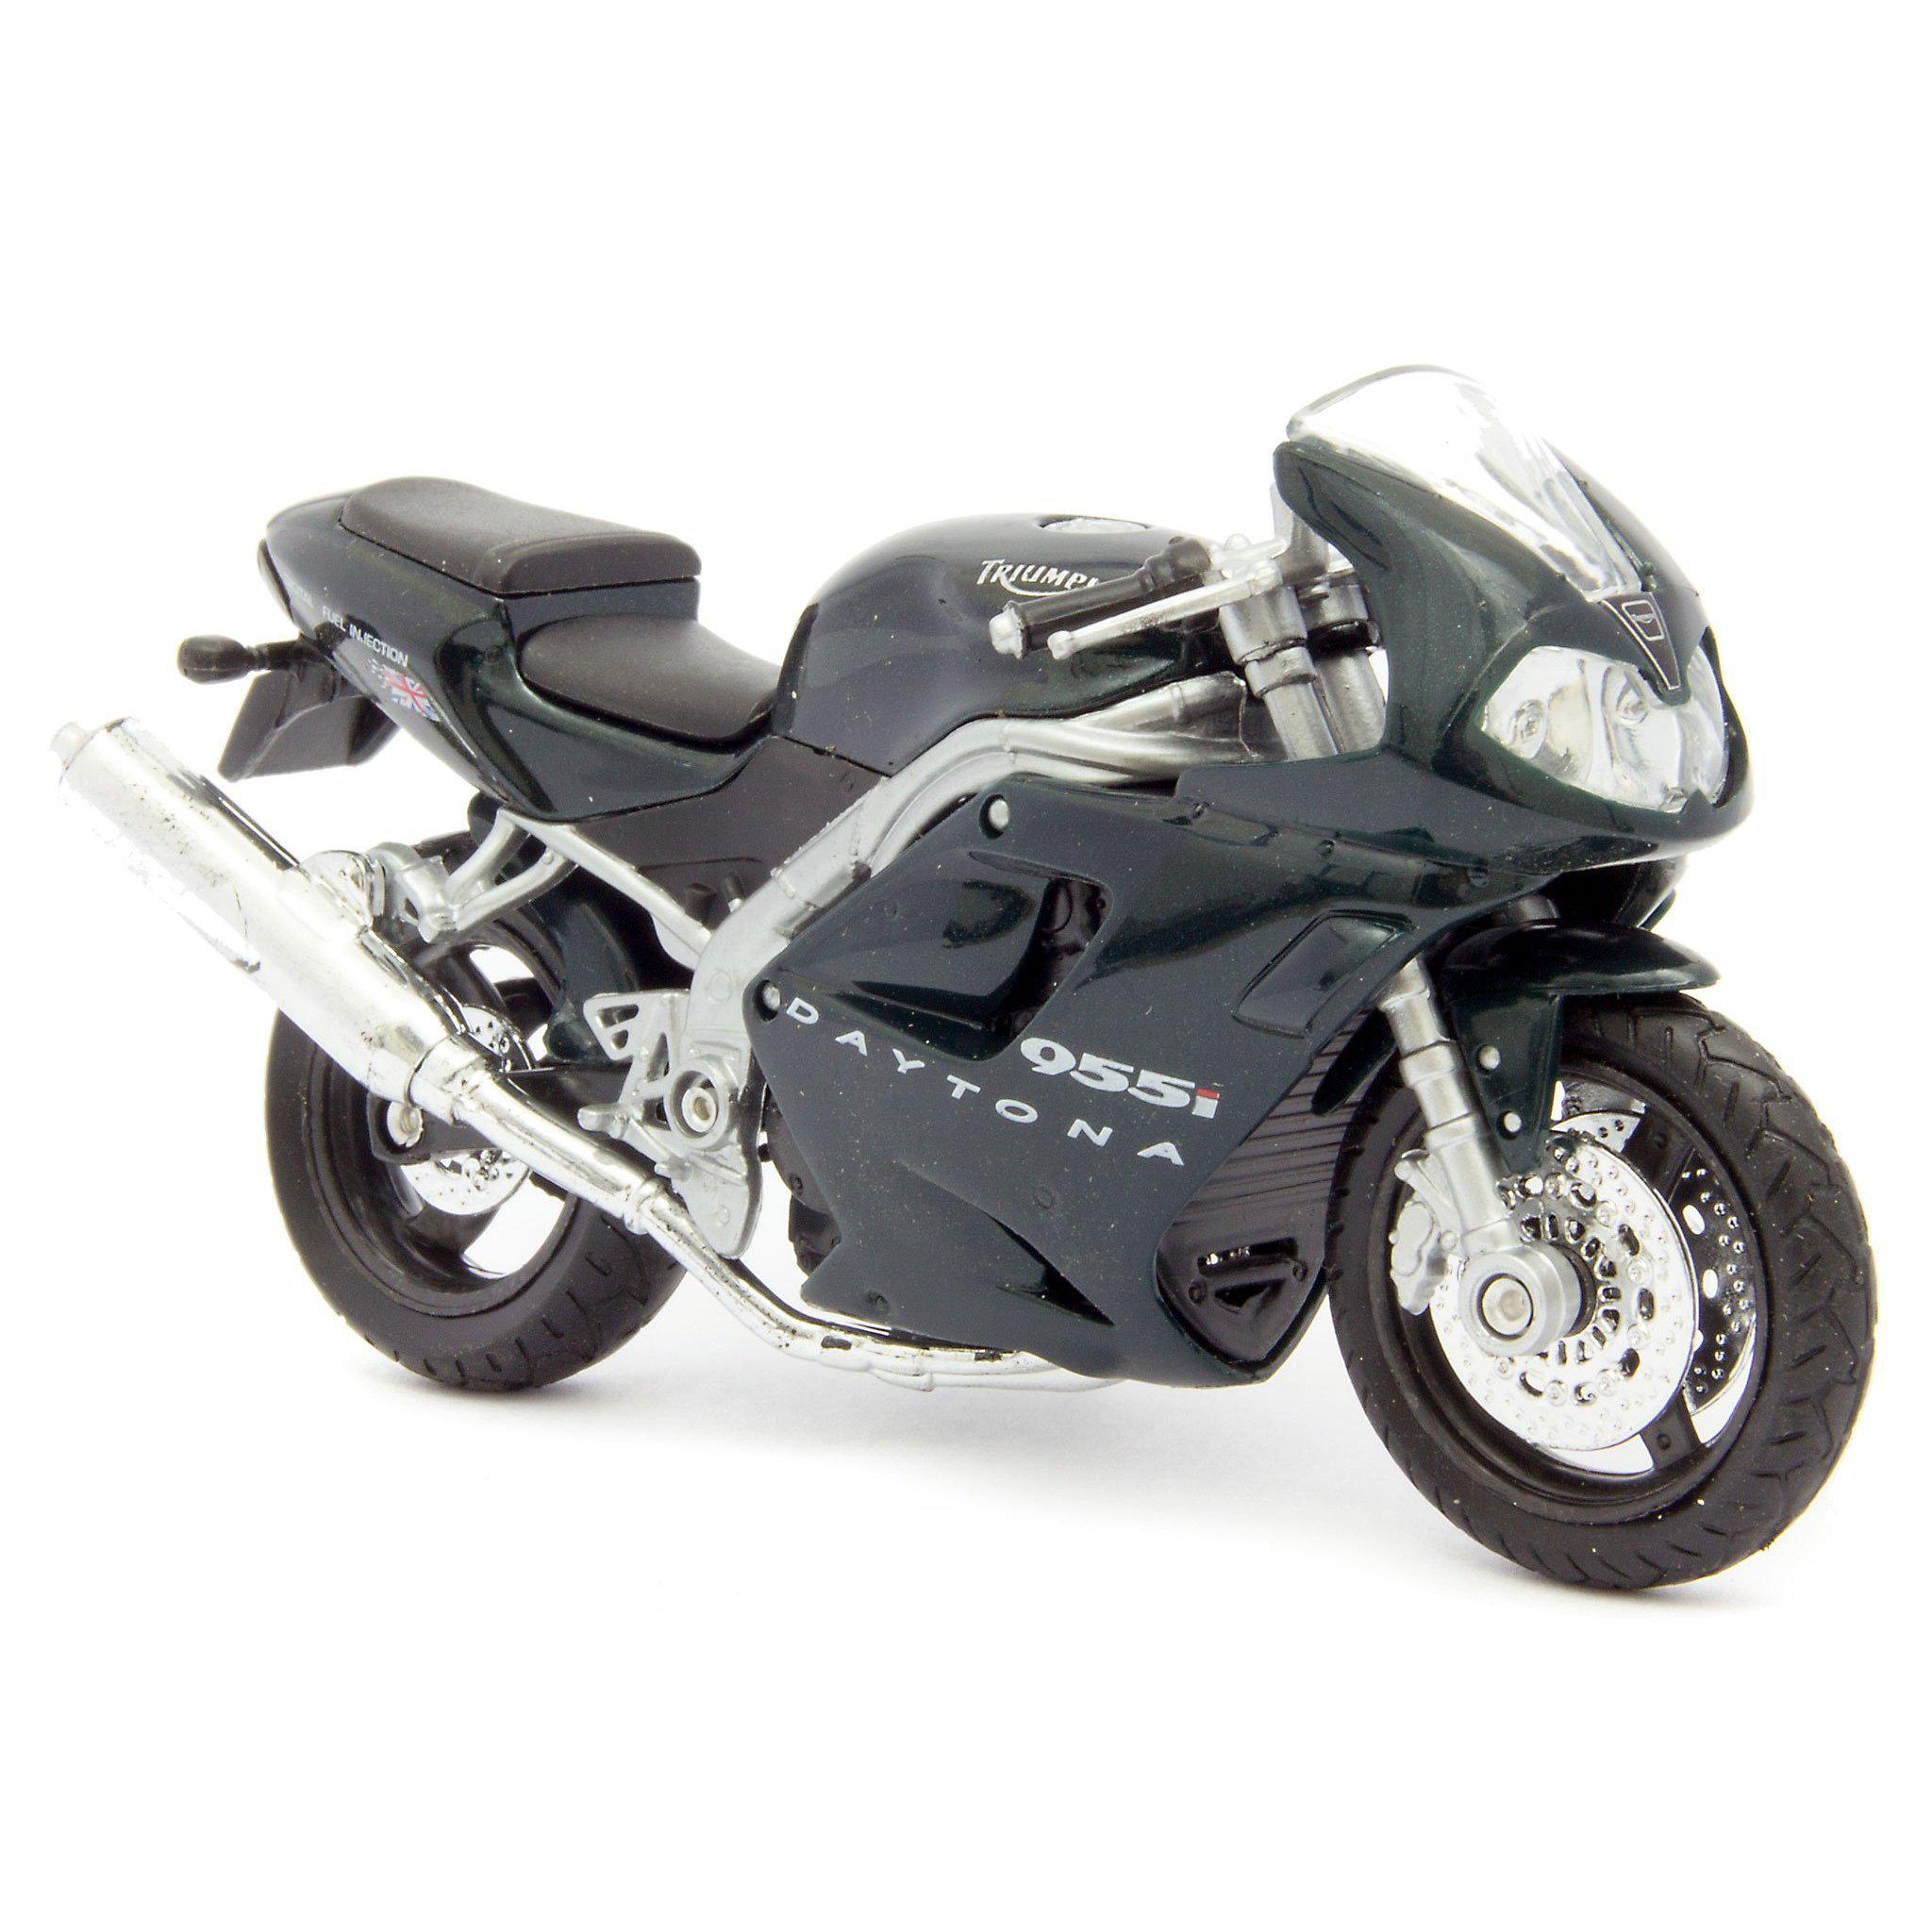 Triumph Daytona 955i Diecast Model Motorcycle 2002 - 1:18 Scale-Welly-Diecast Model Centre